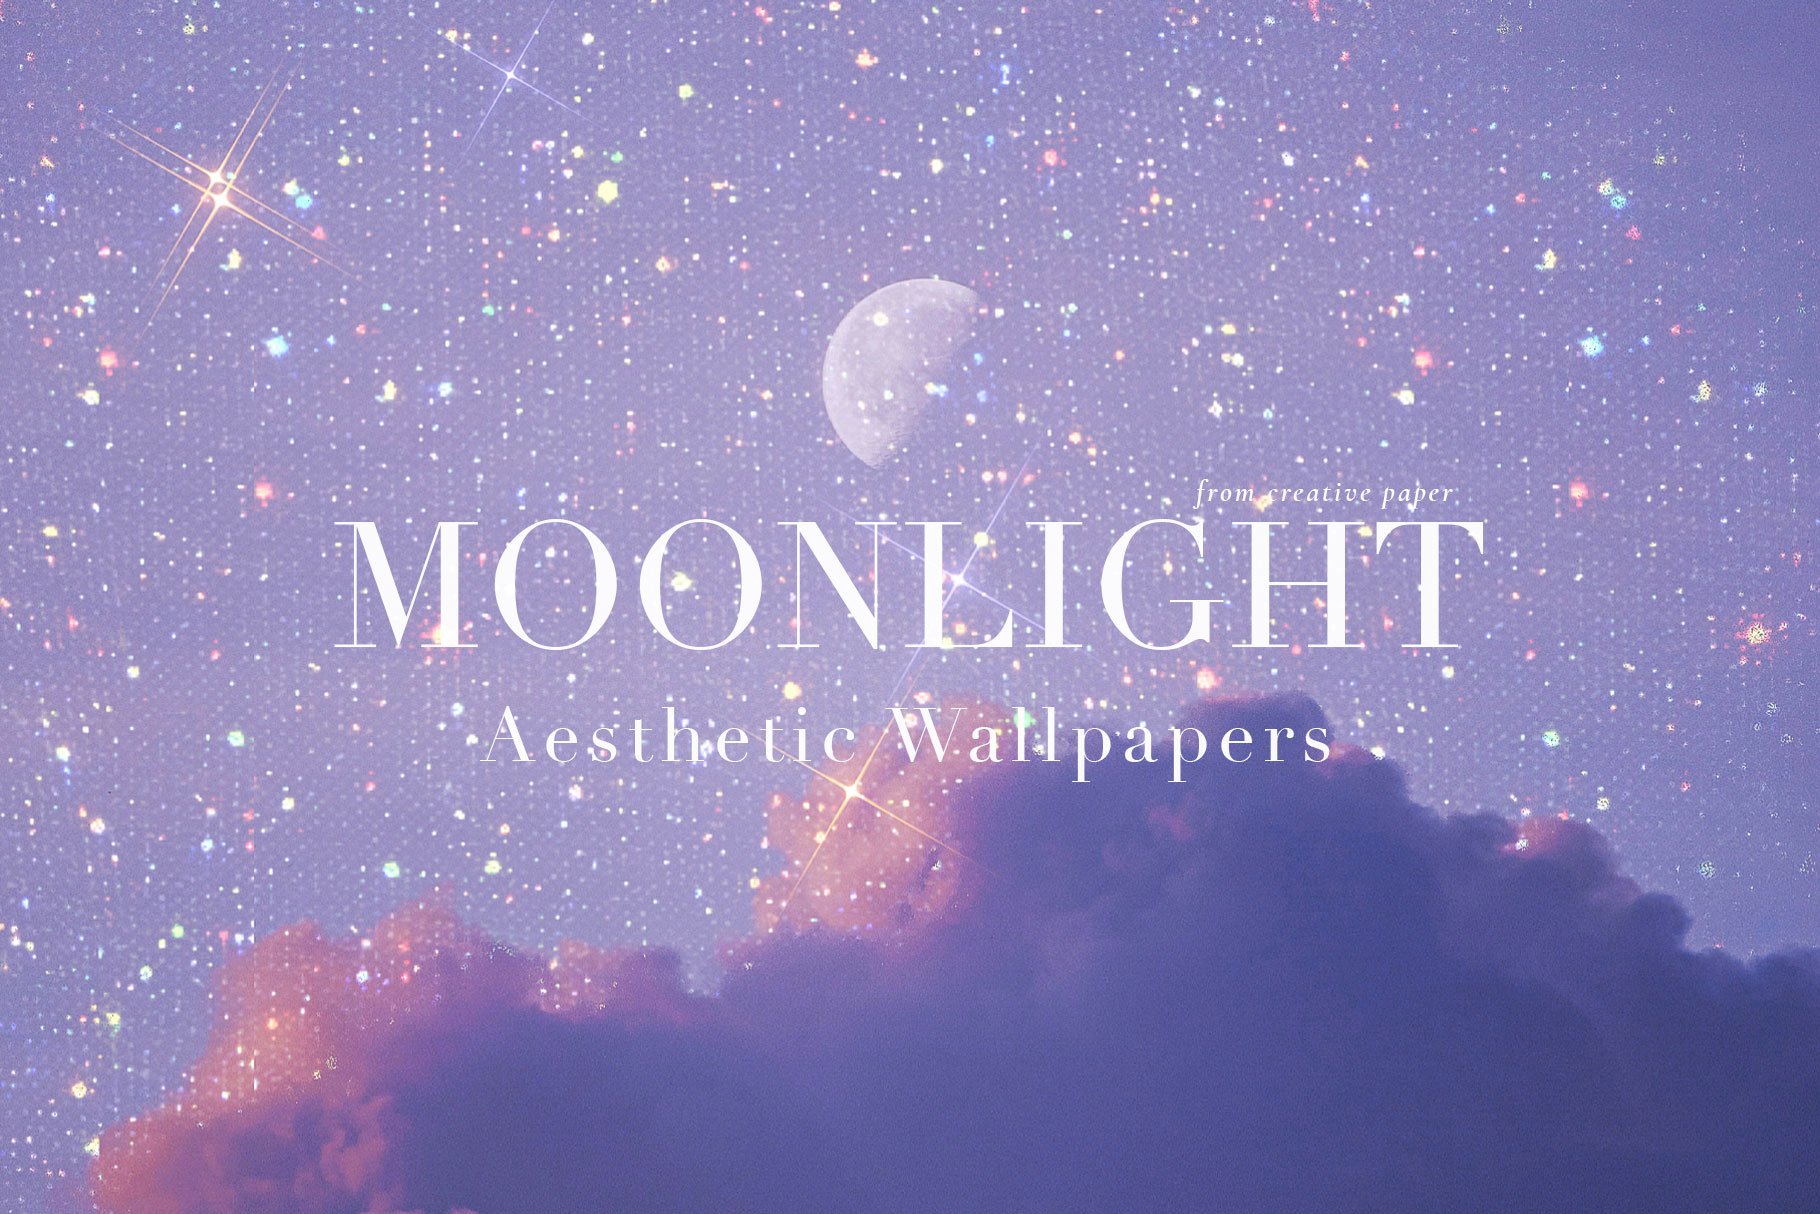 Moonlight I Aesthetic Backgrounds cover image.